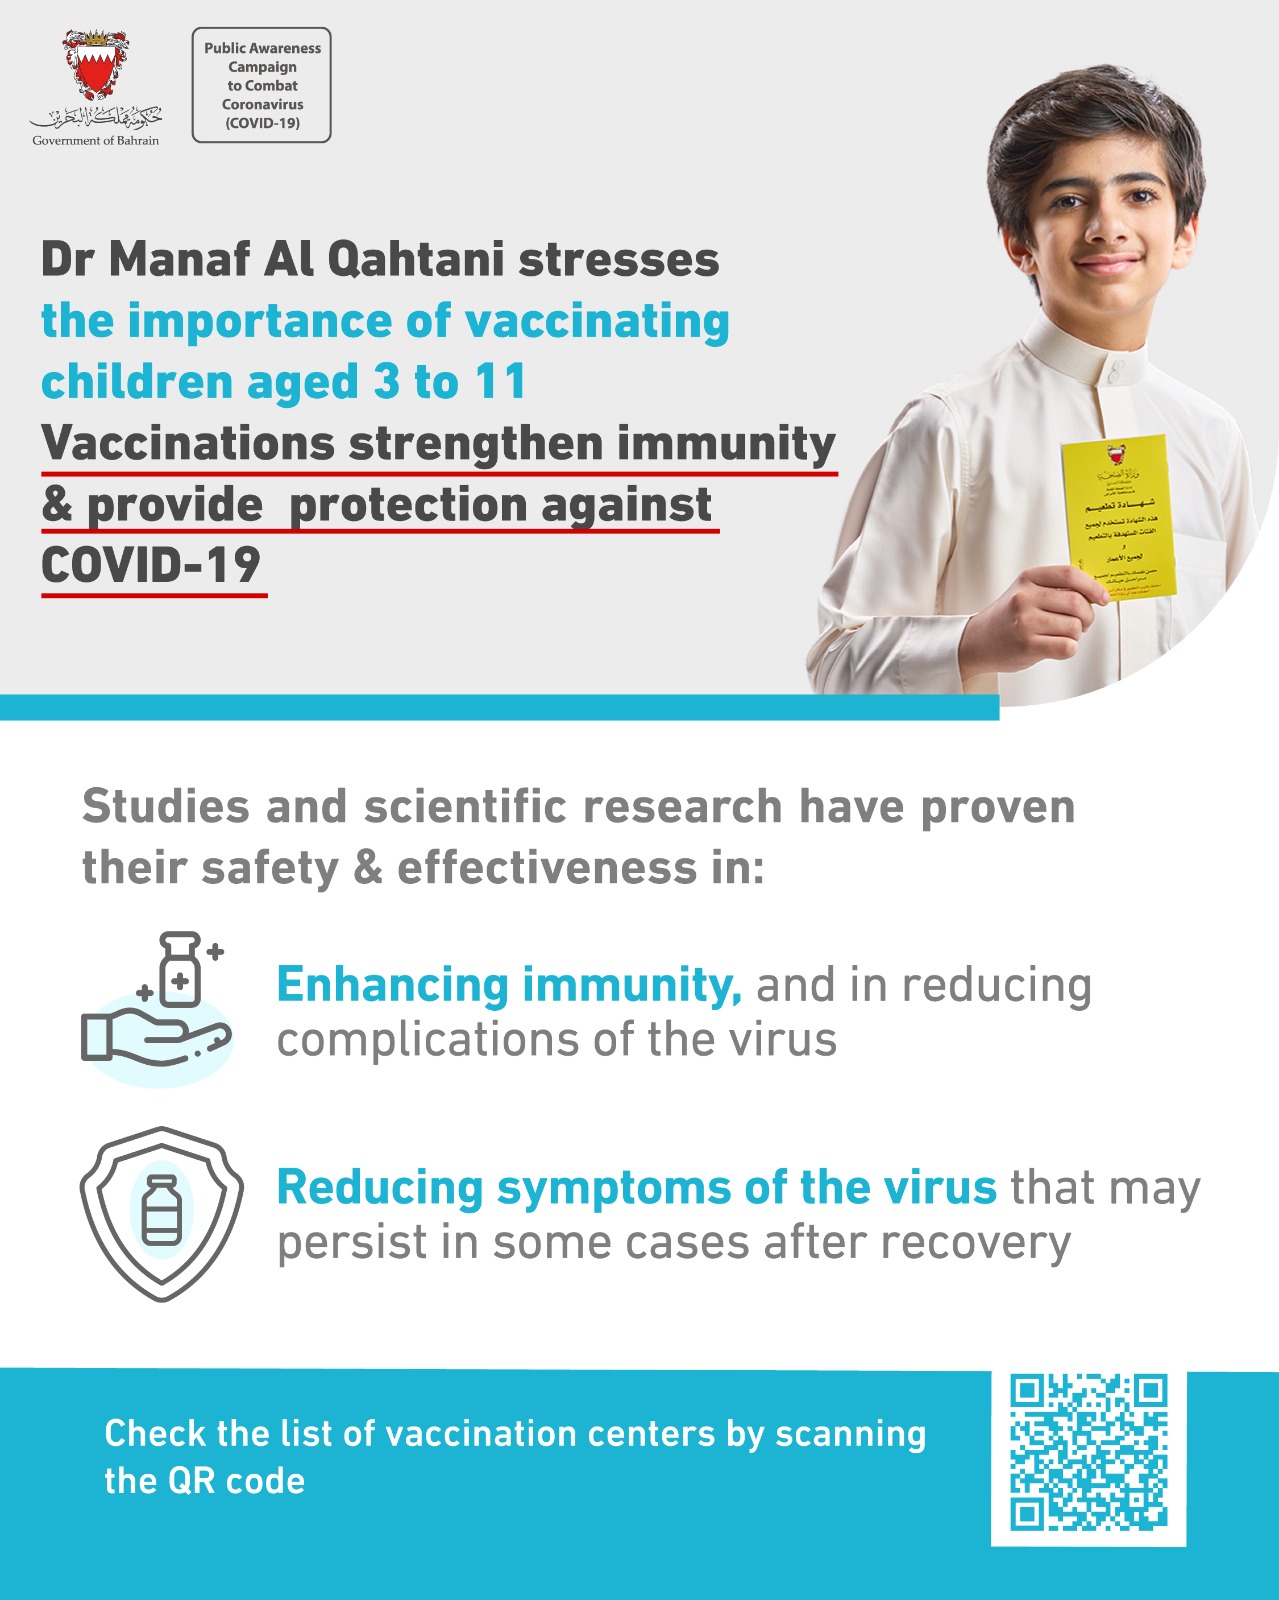 Dr Manaf Al Qahtani highlights the importance of the COVID-19 vaccination for those aged 3 - 11